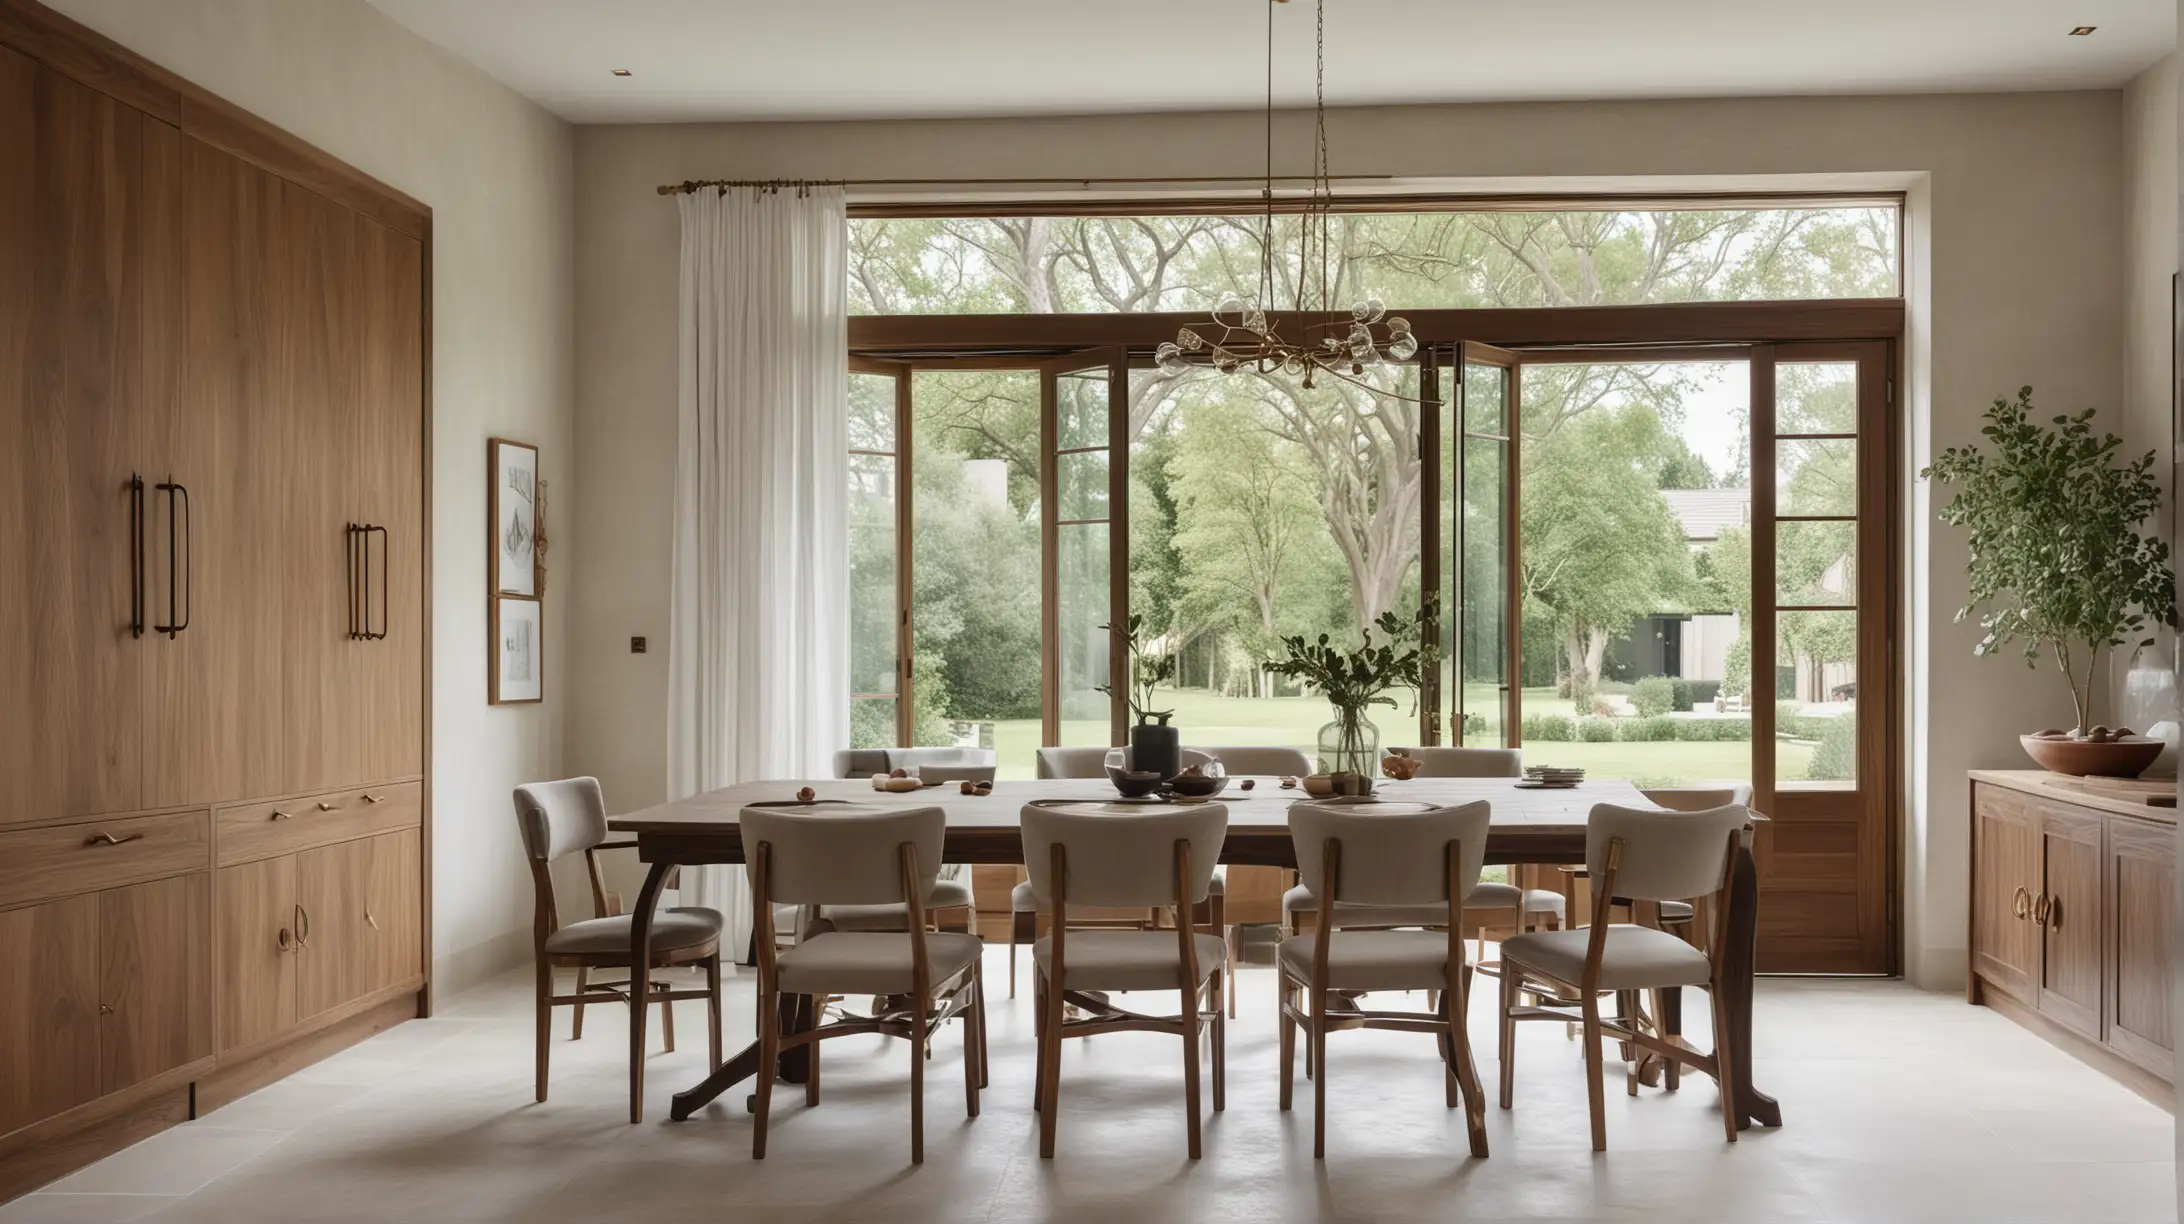 a large minimalist organic moody European farmhouse inspired home dining room; limestone floor, walnut wood cabinets, limewash painted walls, brass handles; large window overlooking the garden; glass fluted panel doors to the butlers pantry

